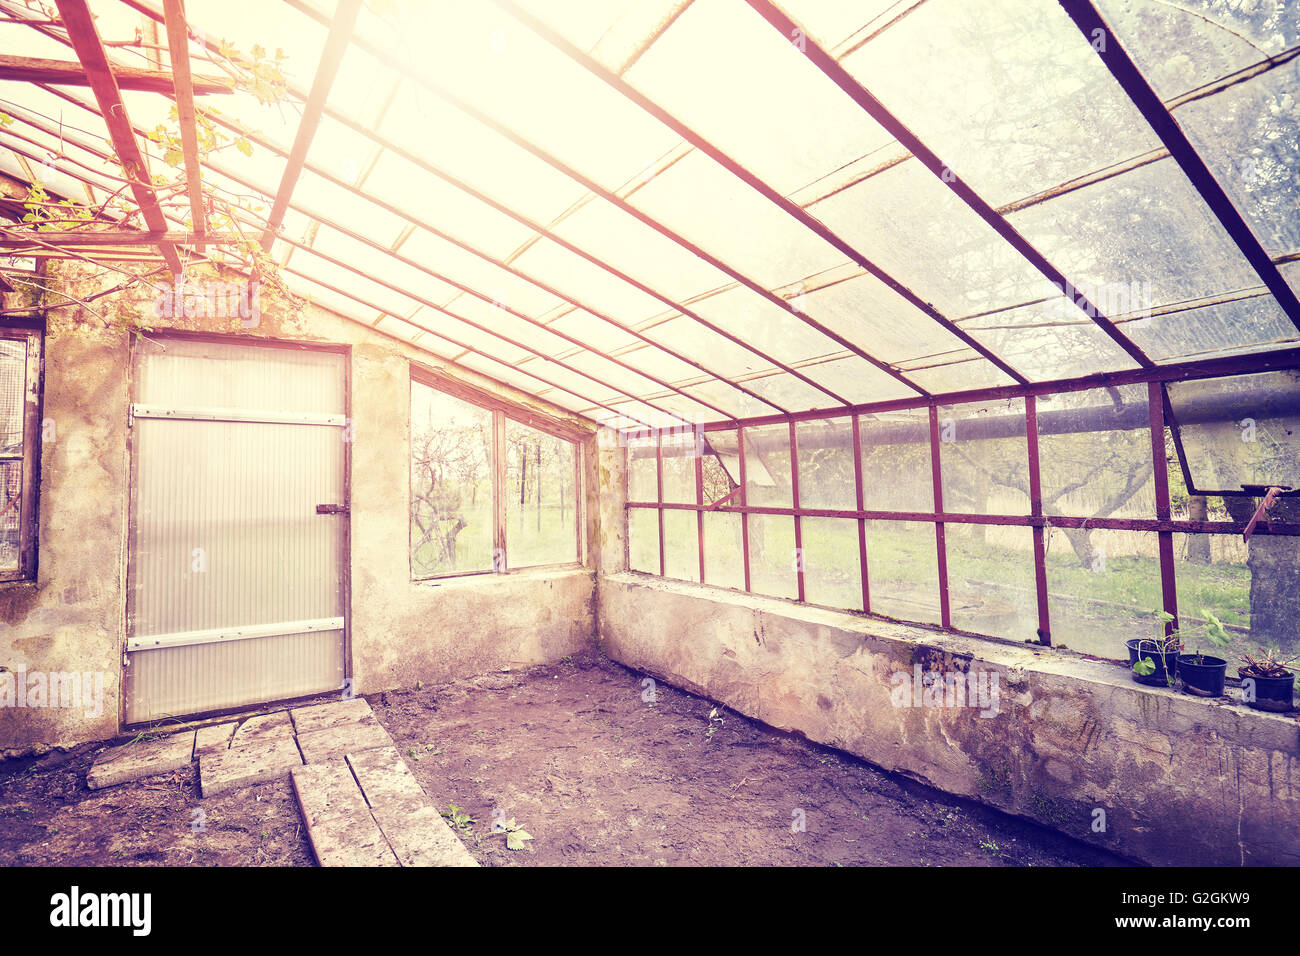 Vintage toned wide angle picture of an old empty glasshouse. Stock Photo